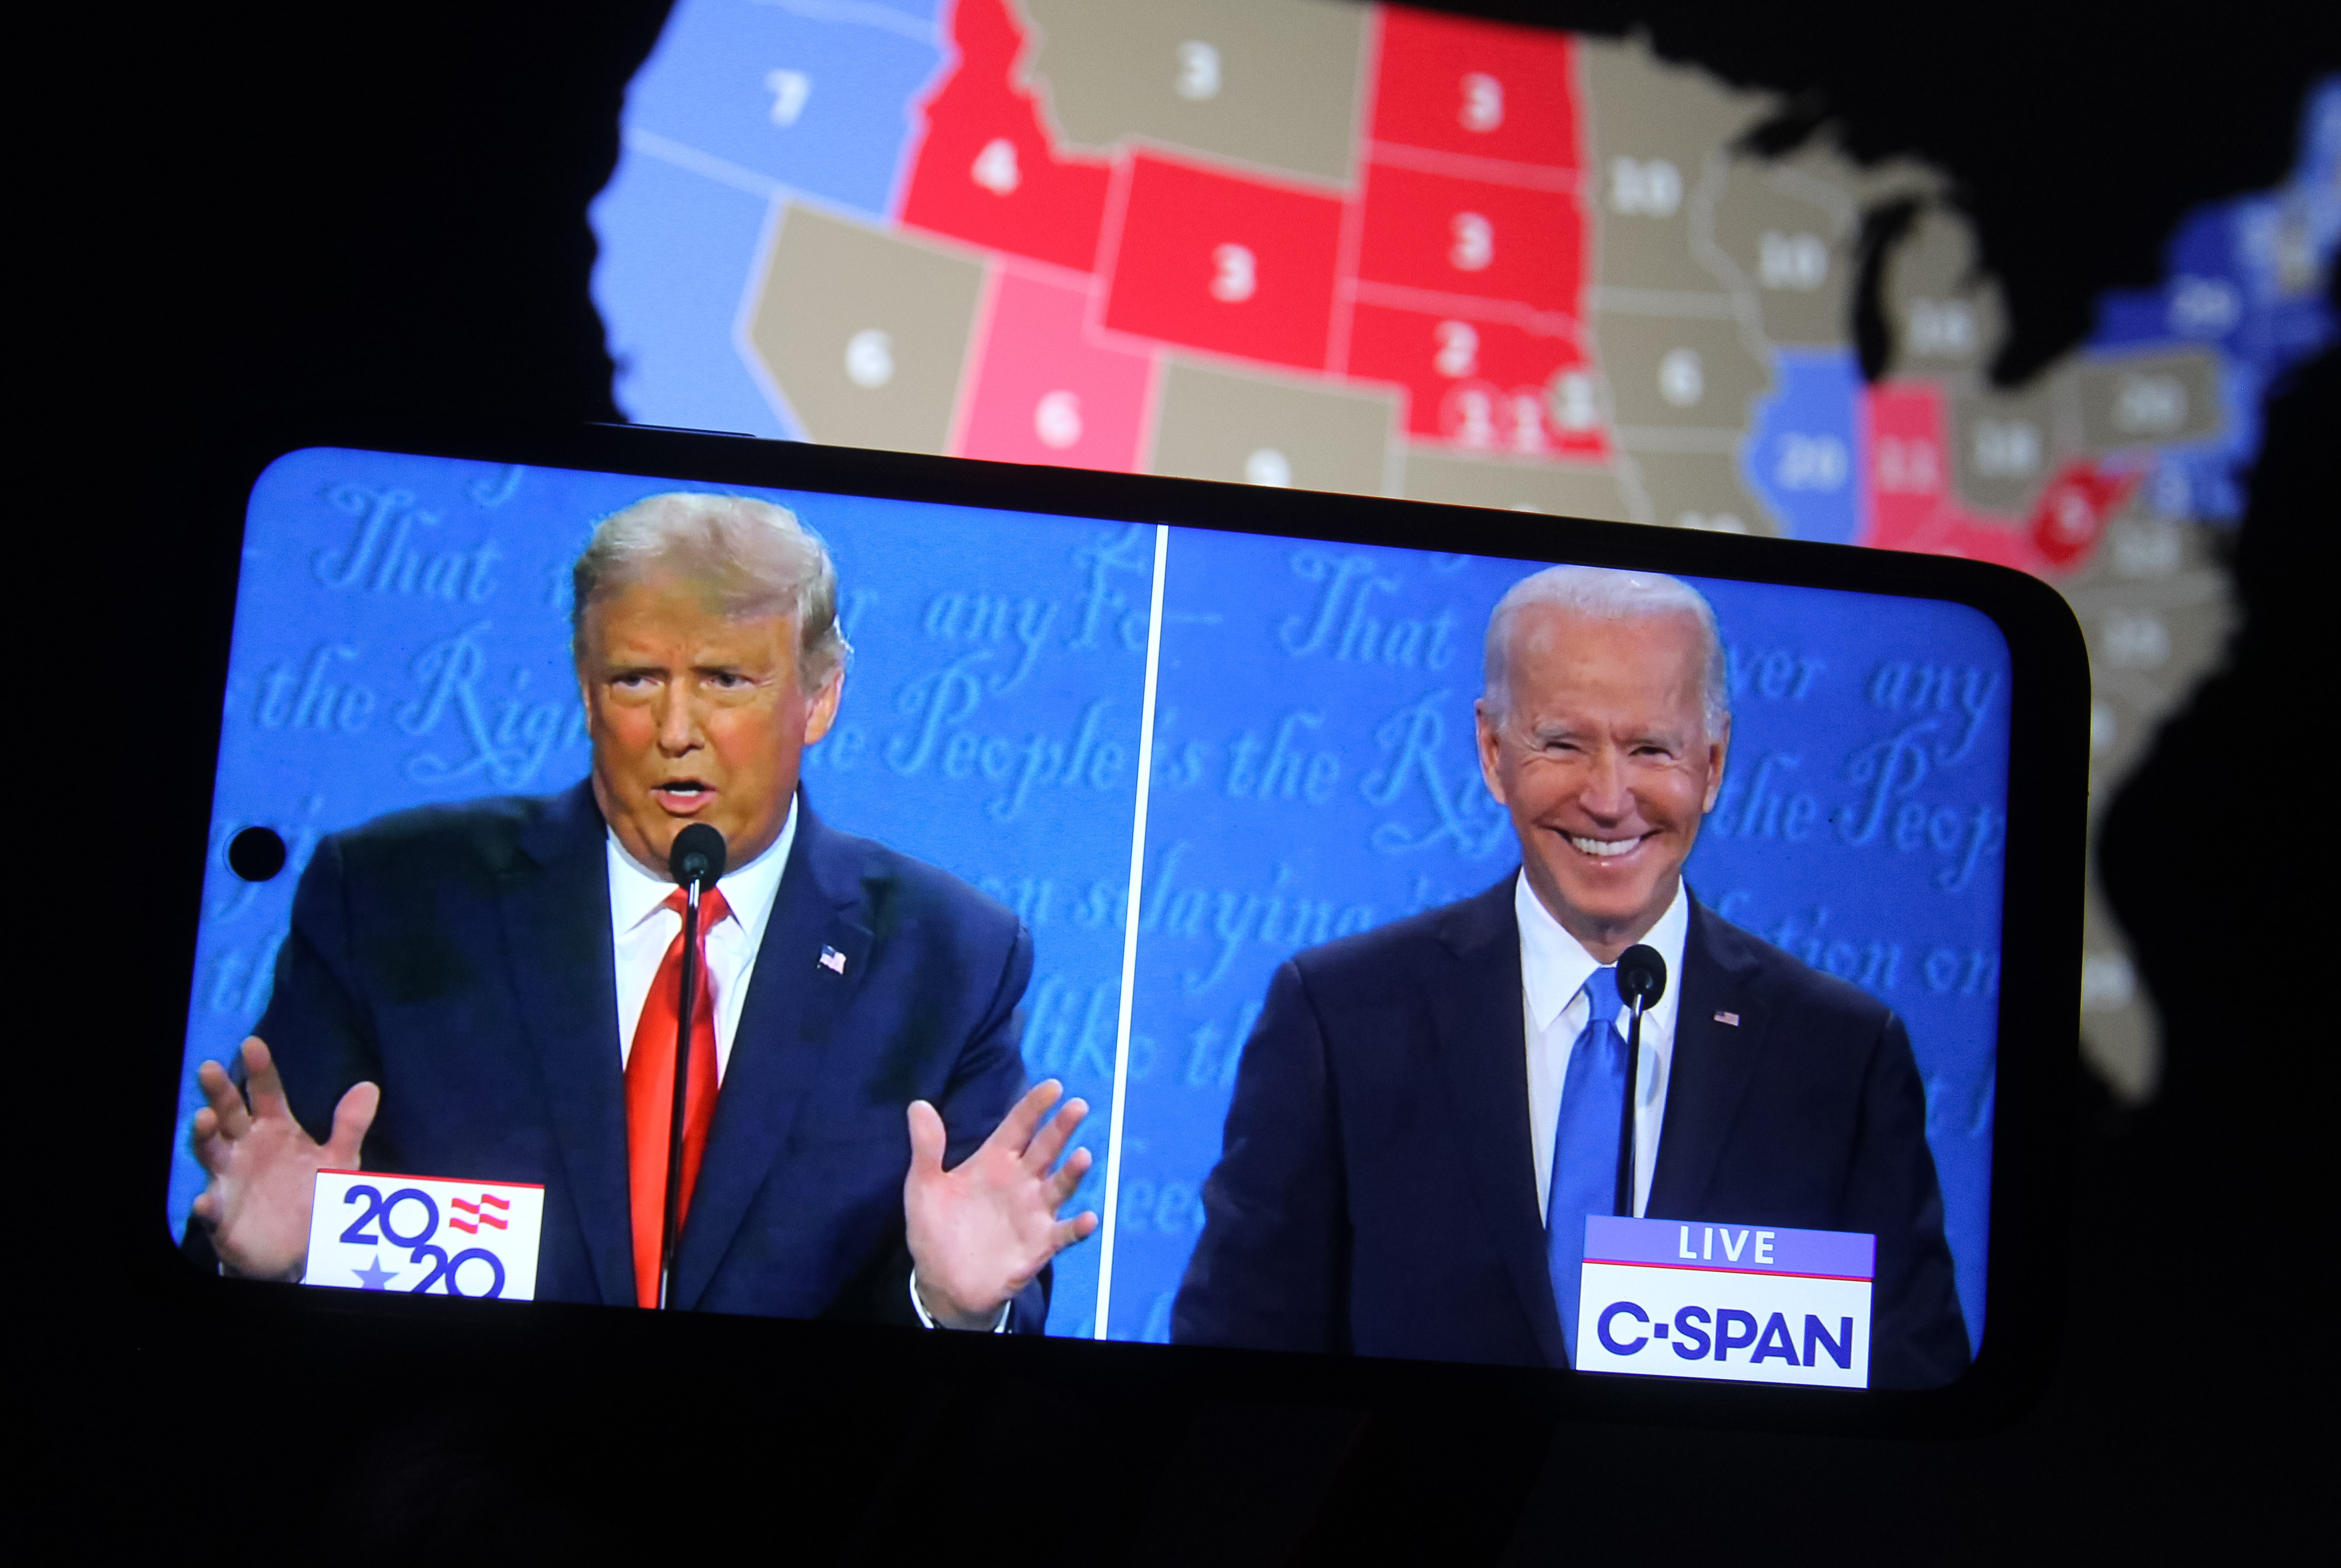 A photo illustration of President Donald Trump and Democratic presidential candidate Joe Biden on a smartphone screen, in front of an electoral map.